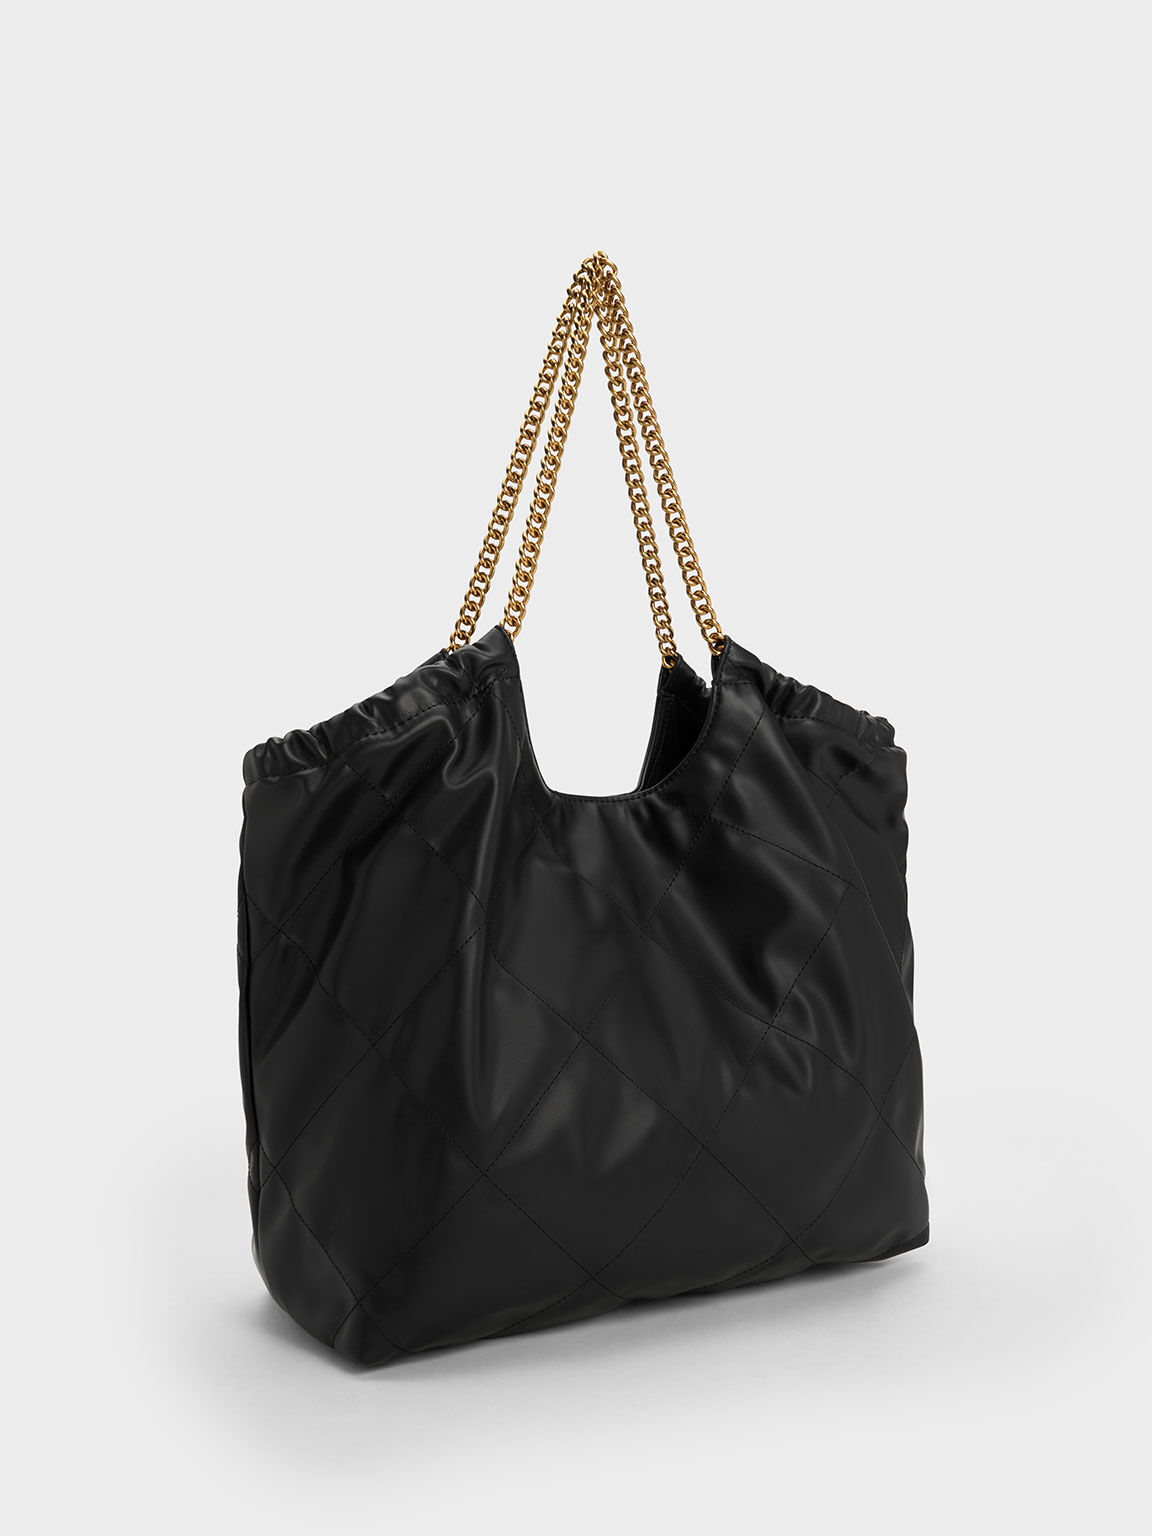 Tote Bag with Braided Handles